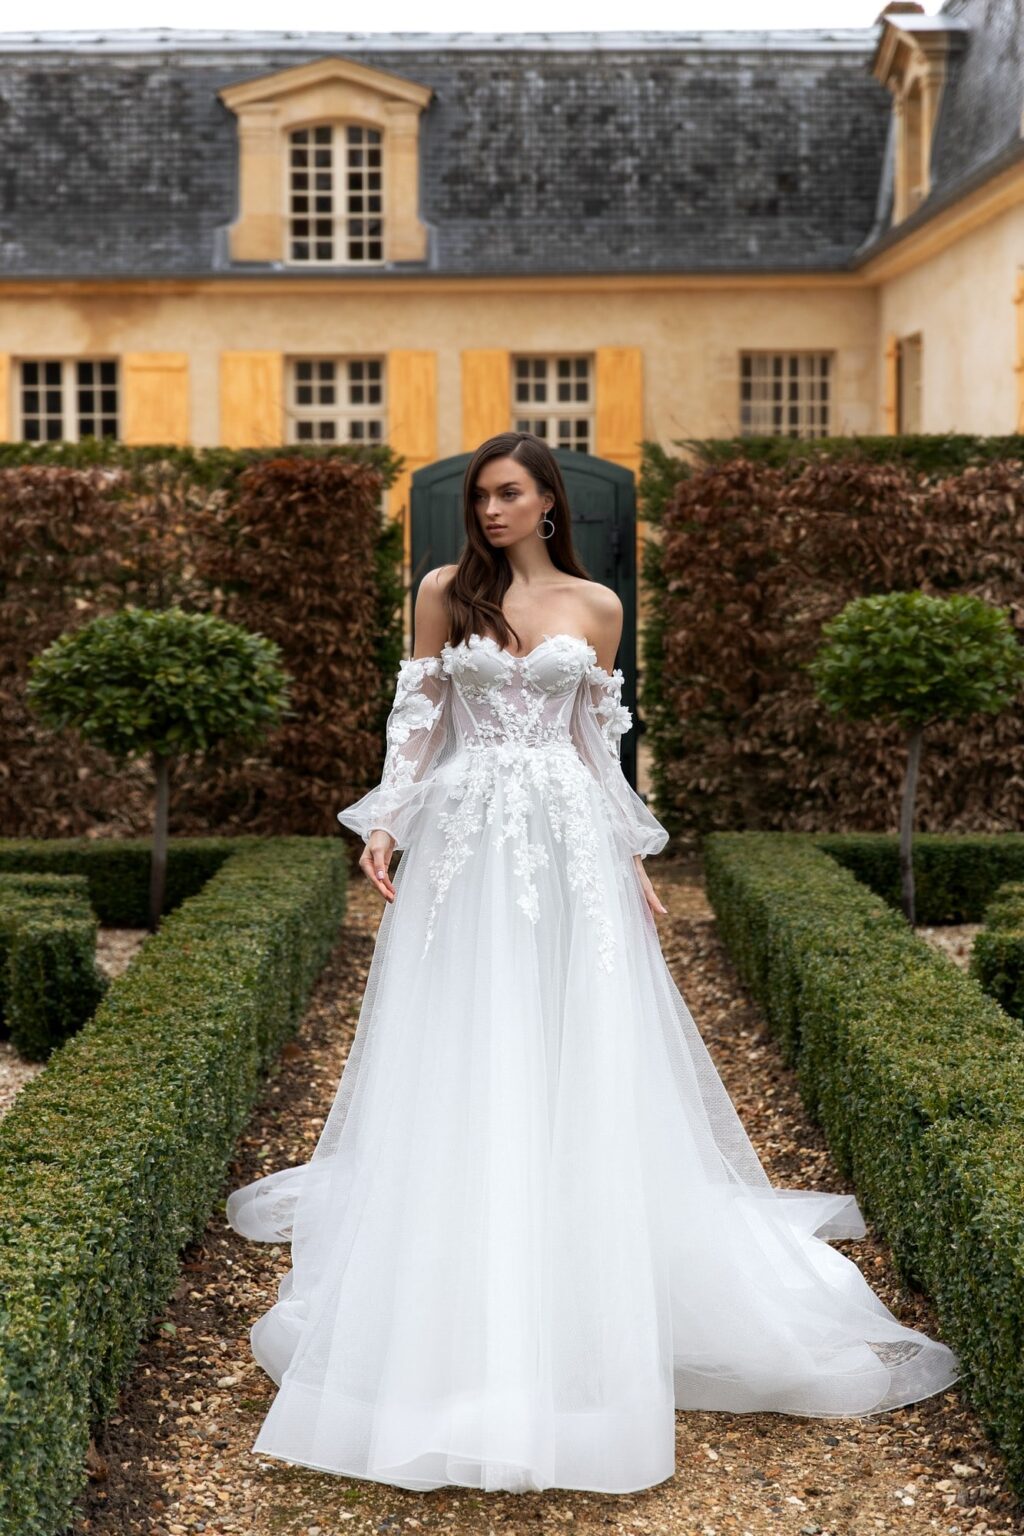 Bridal gown styles